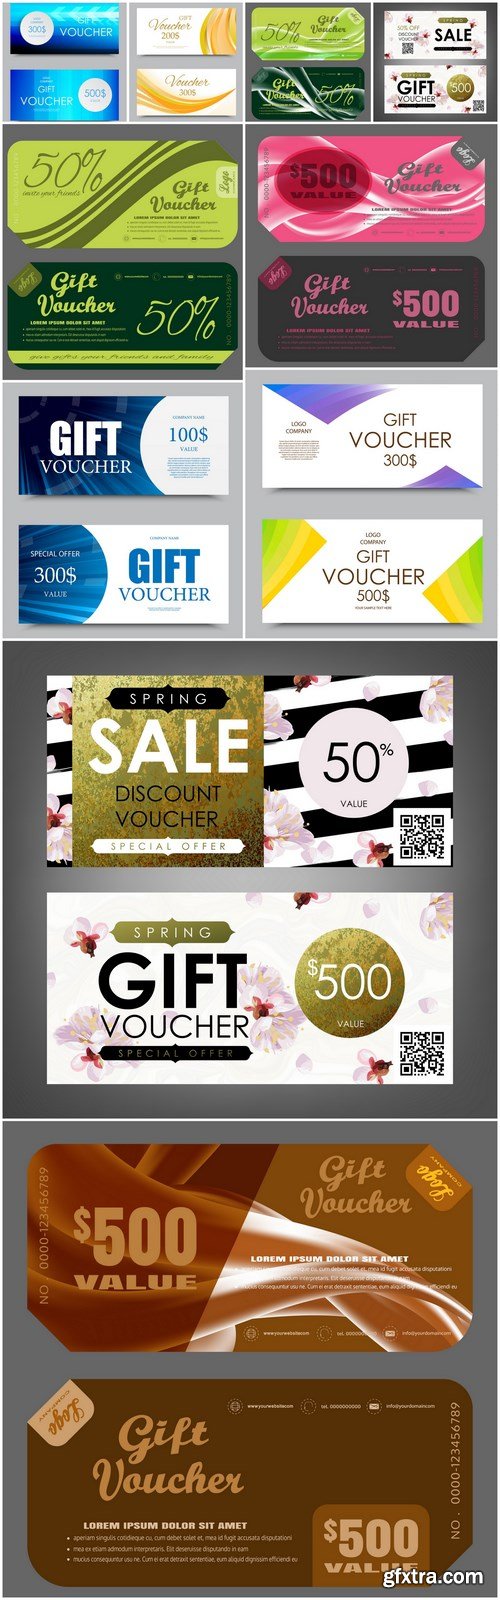 Gift Voucher Collection #33 - 10 Vector